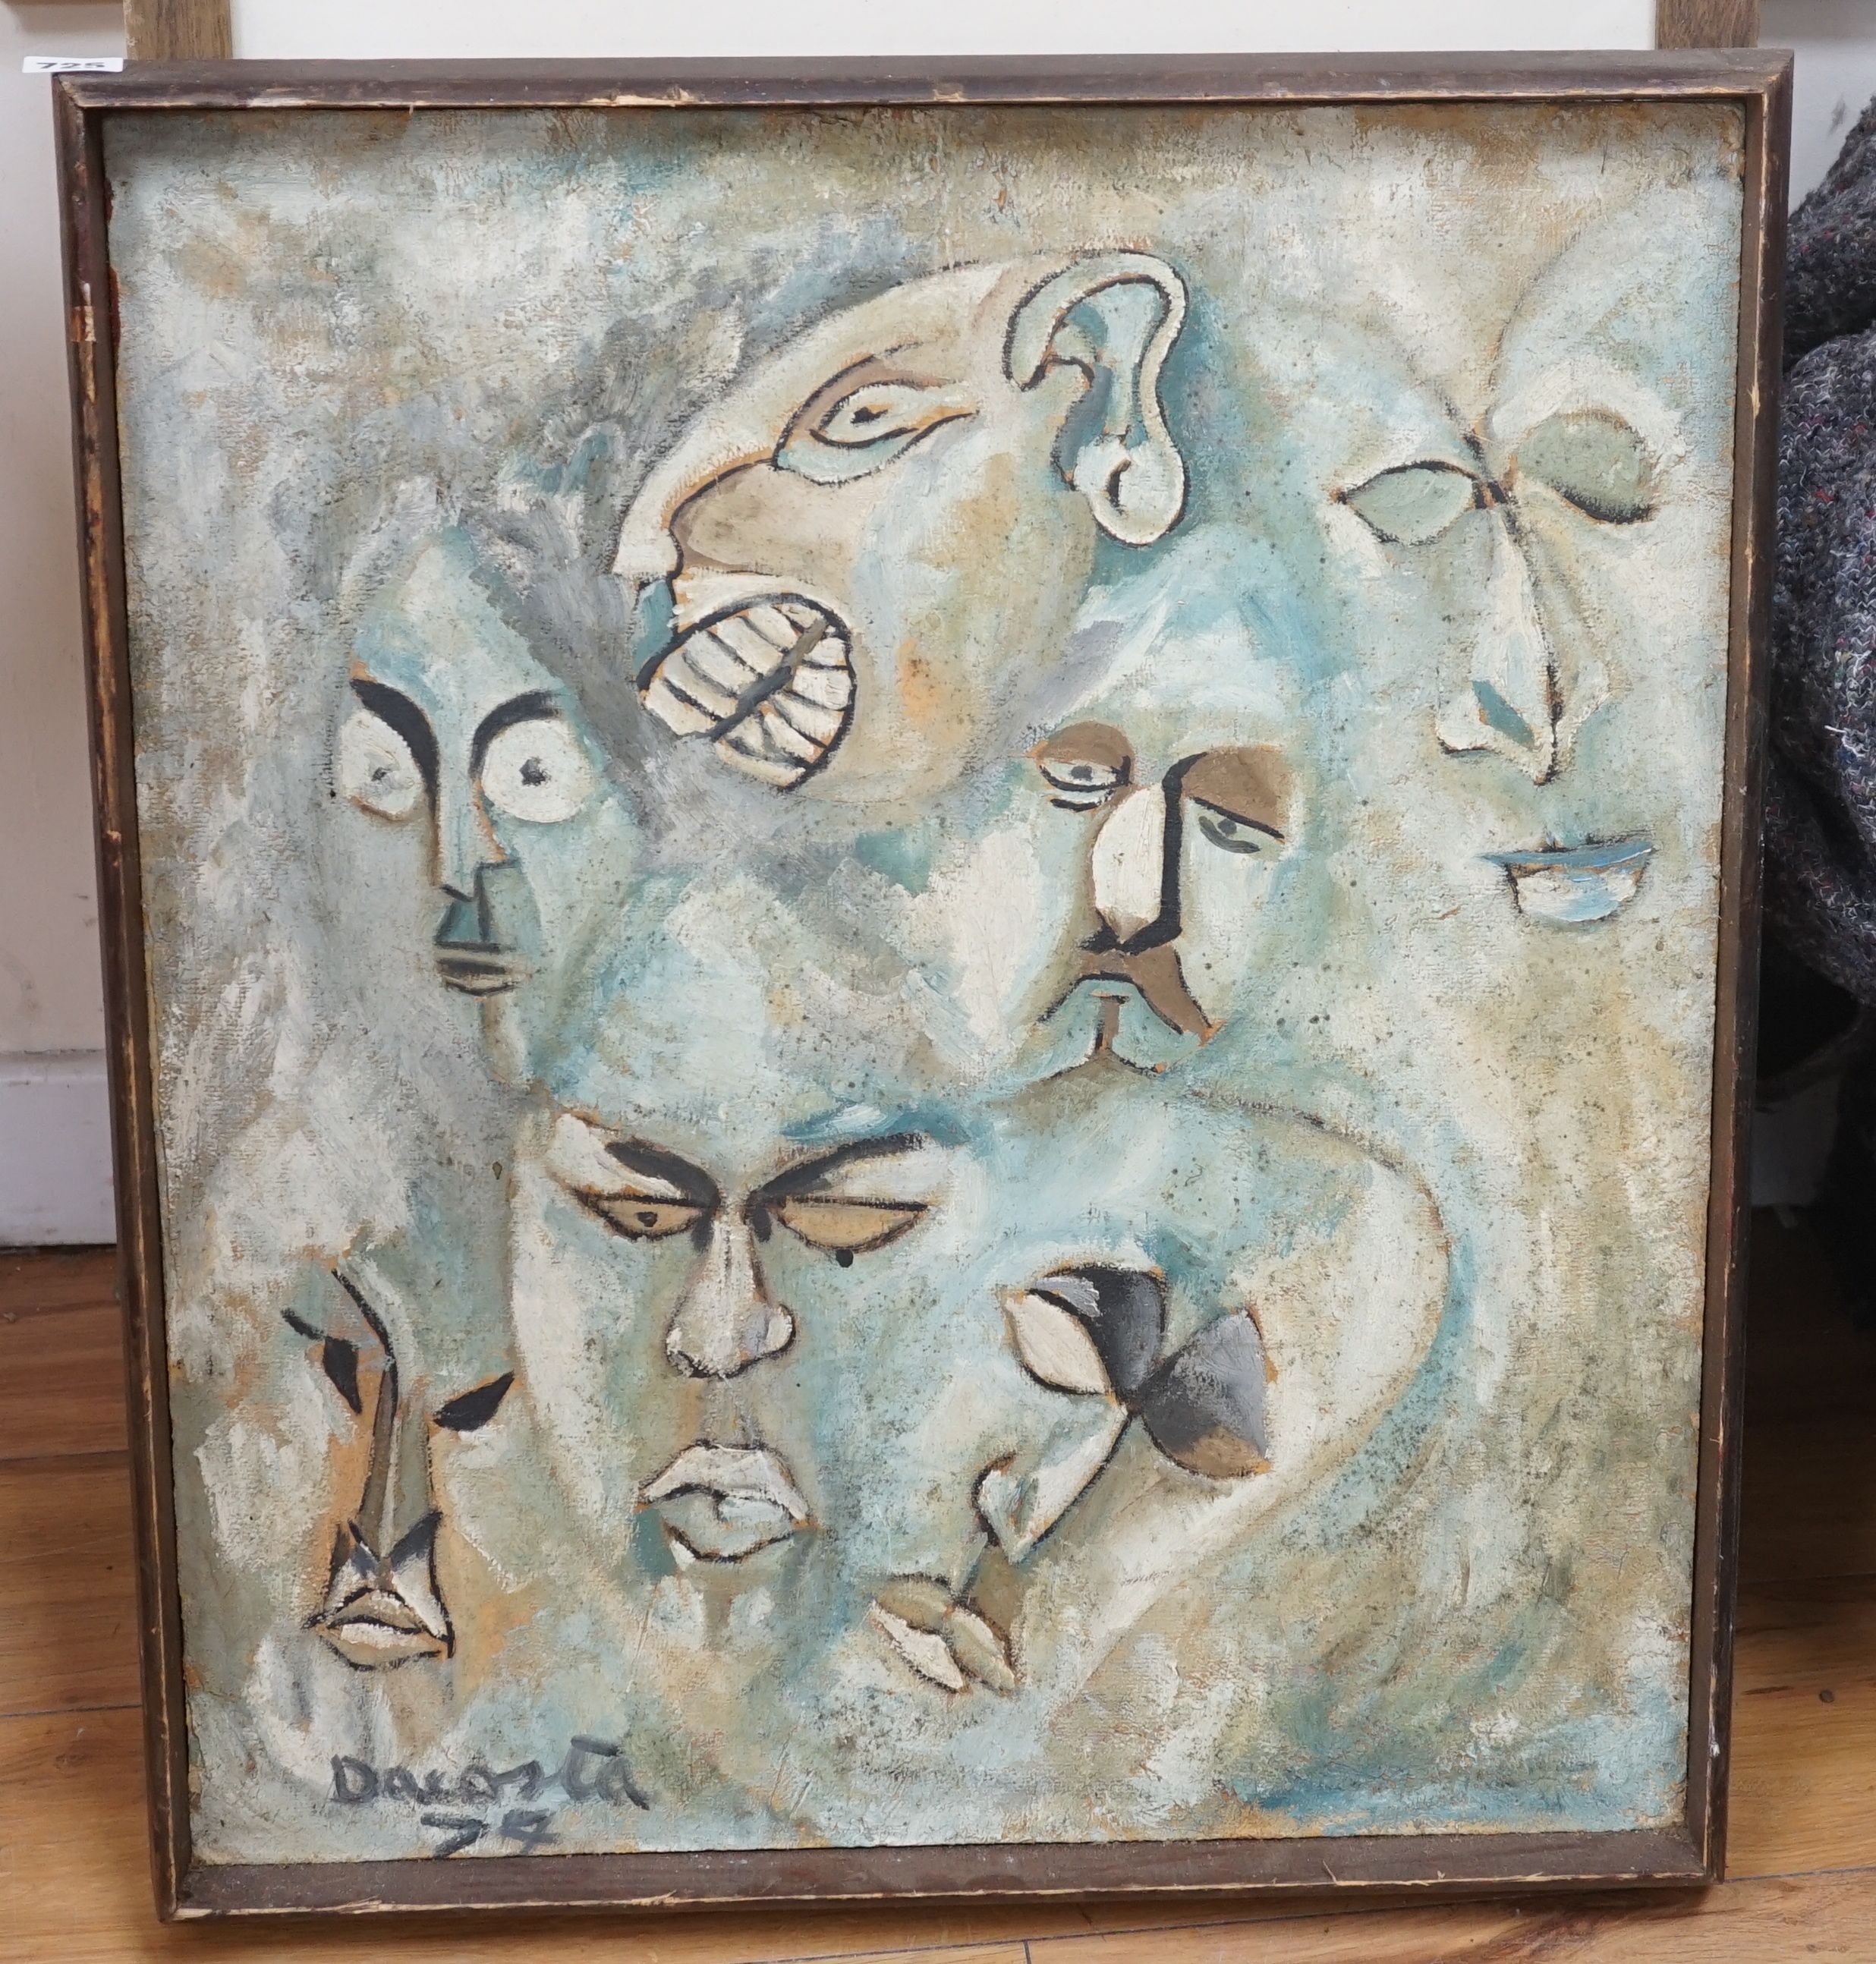 Dacosta, oil on board, Tribal masks, signed and dated '74, 61 x 53cm